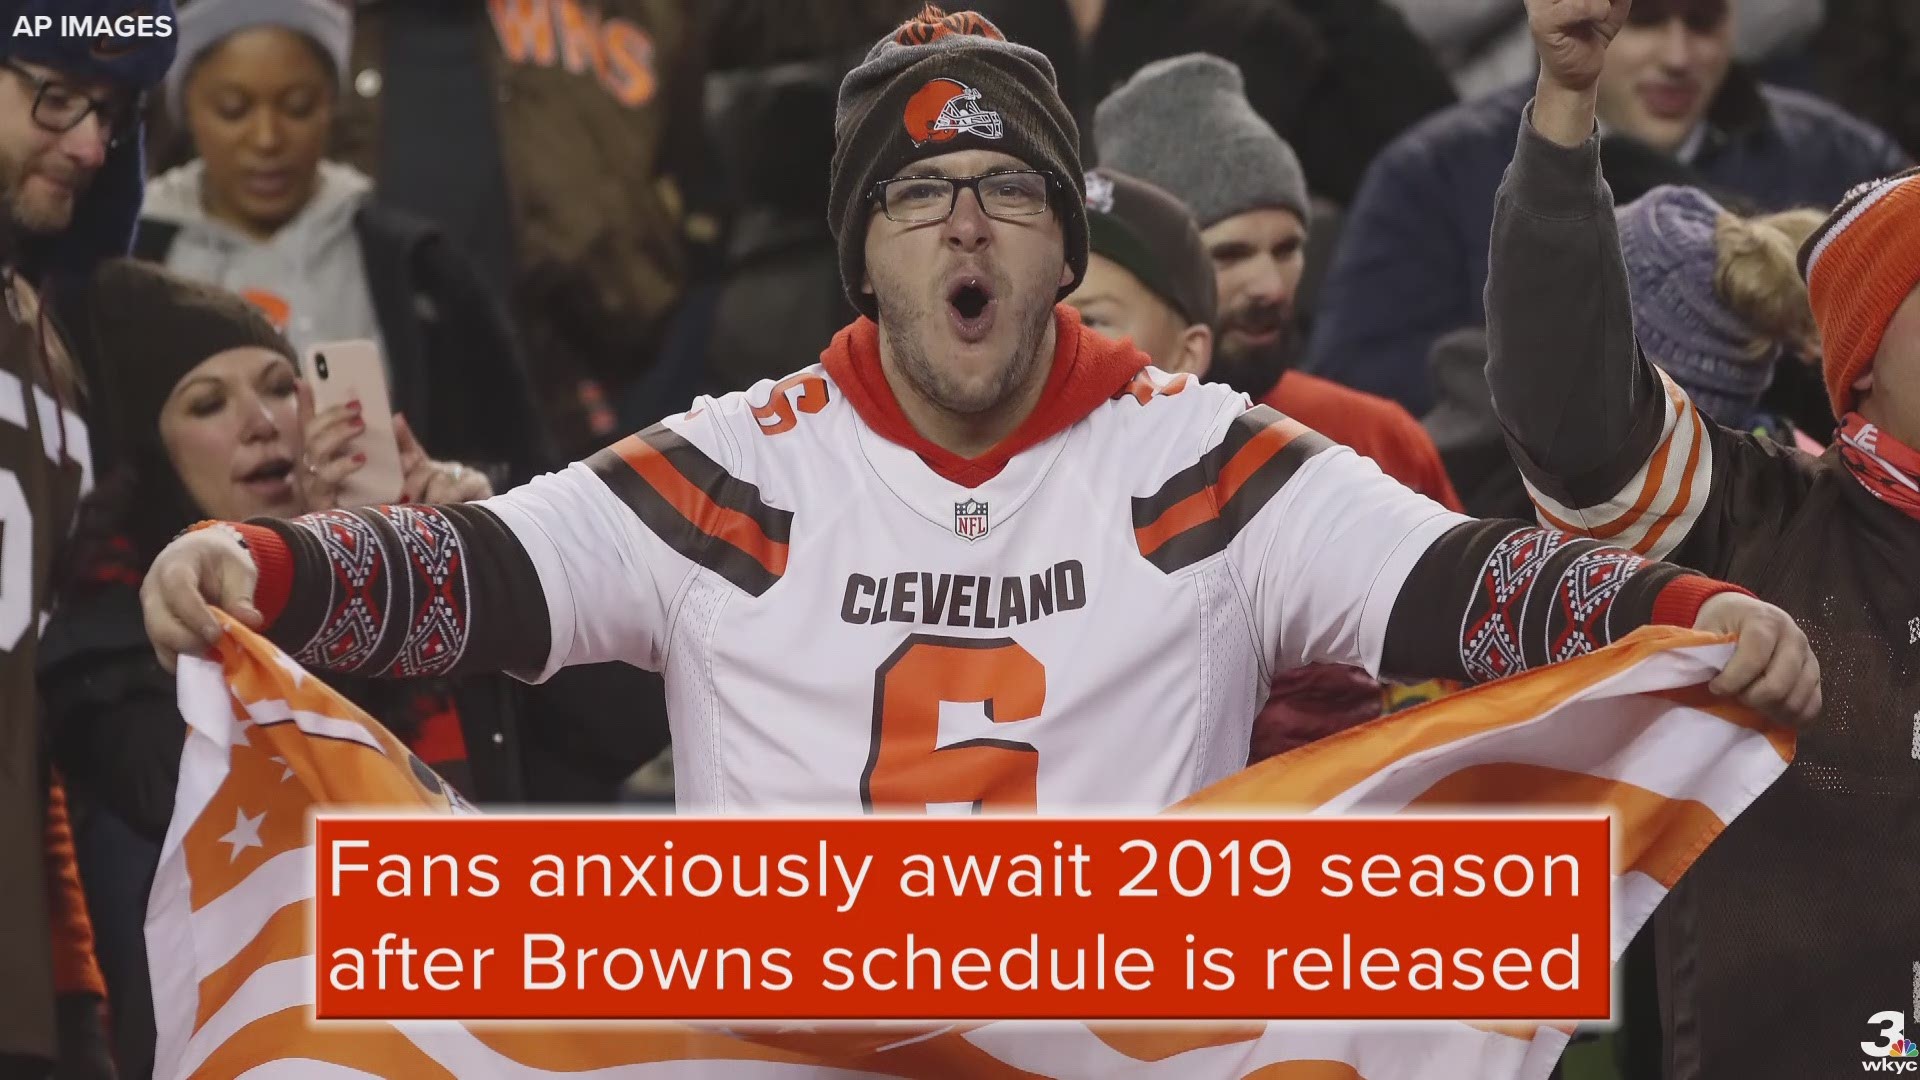 Fans anxiously await the start of the 2019 season after the Cleveland Browns' schedule was released by the National Football League Wednesday.